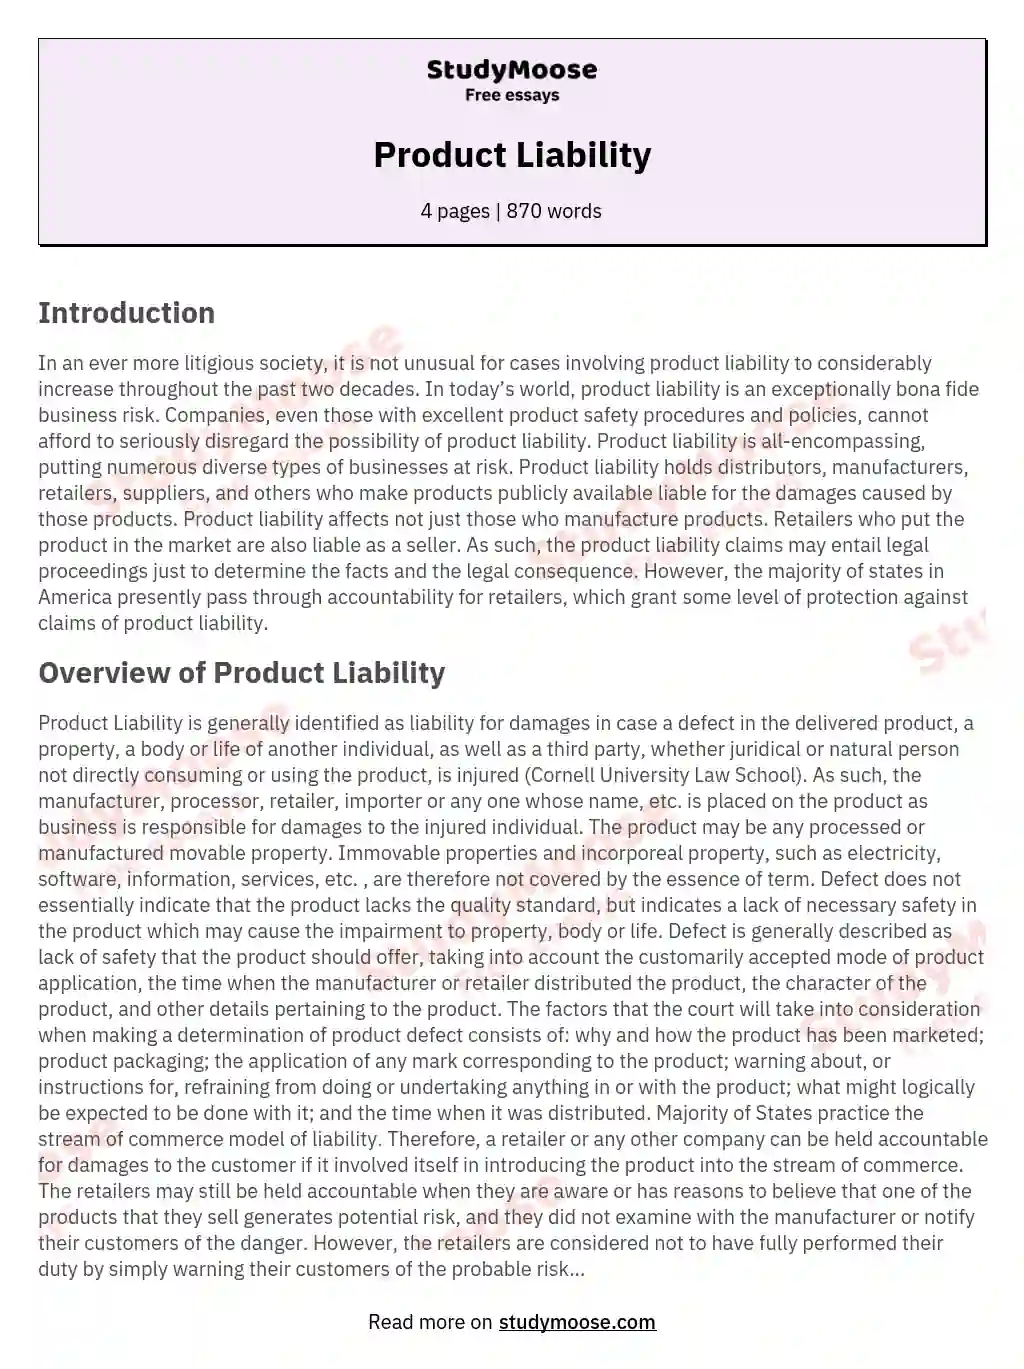 Product Liability essay